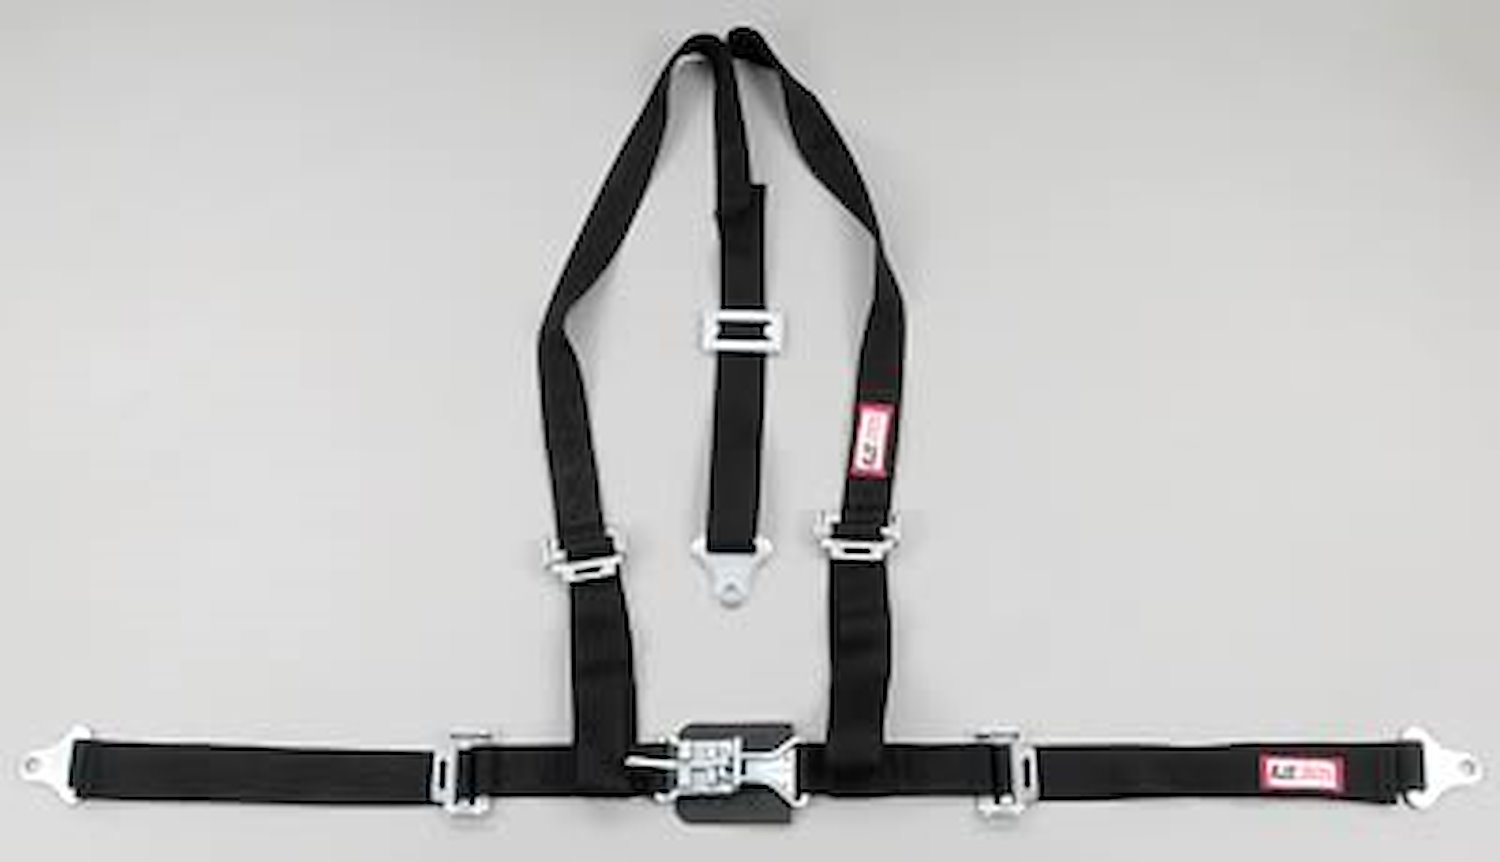 NON-SFI L&L HARNESS 2 PULL DOWN Lap Belt SEWN IN 2 S.H. Y FLOOR Mount w/STERNUM STRAP ALL WRAP ENDS BLACK